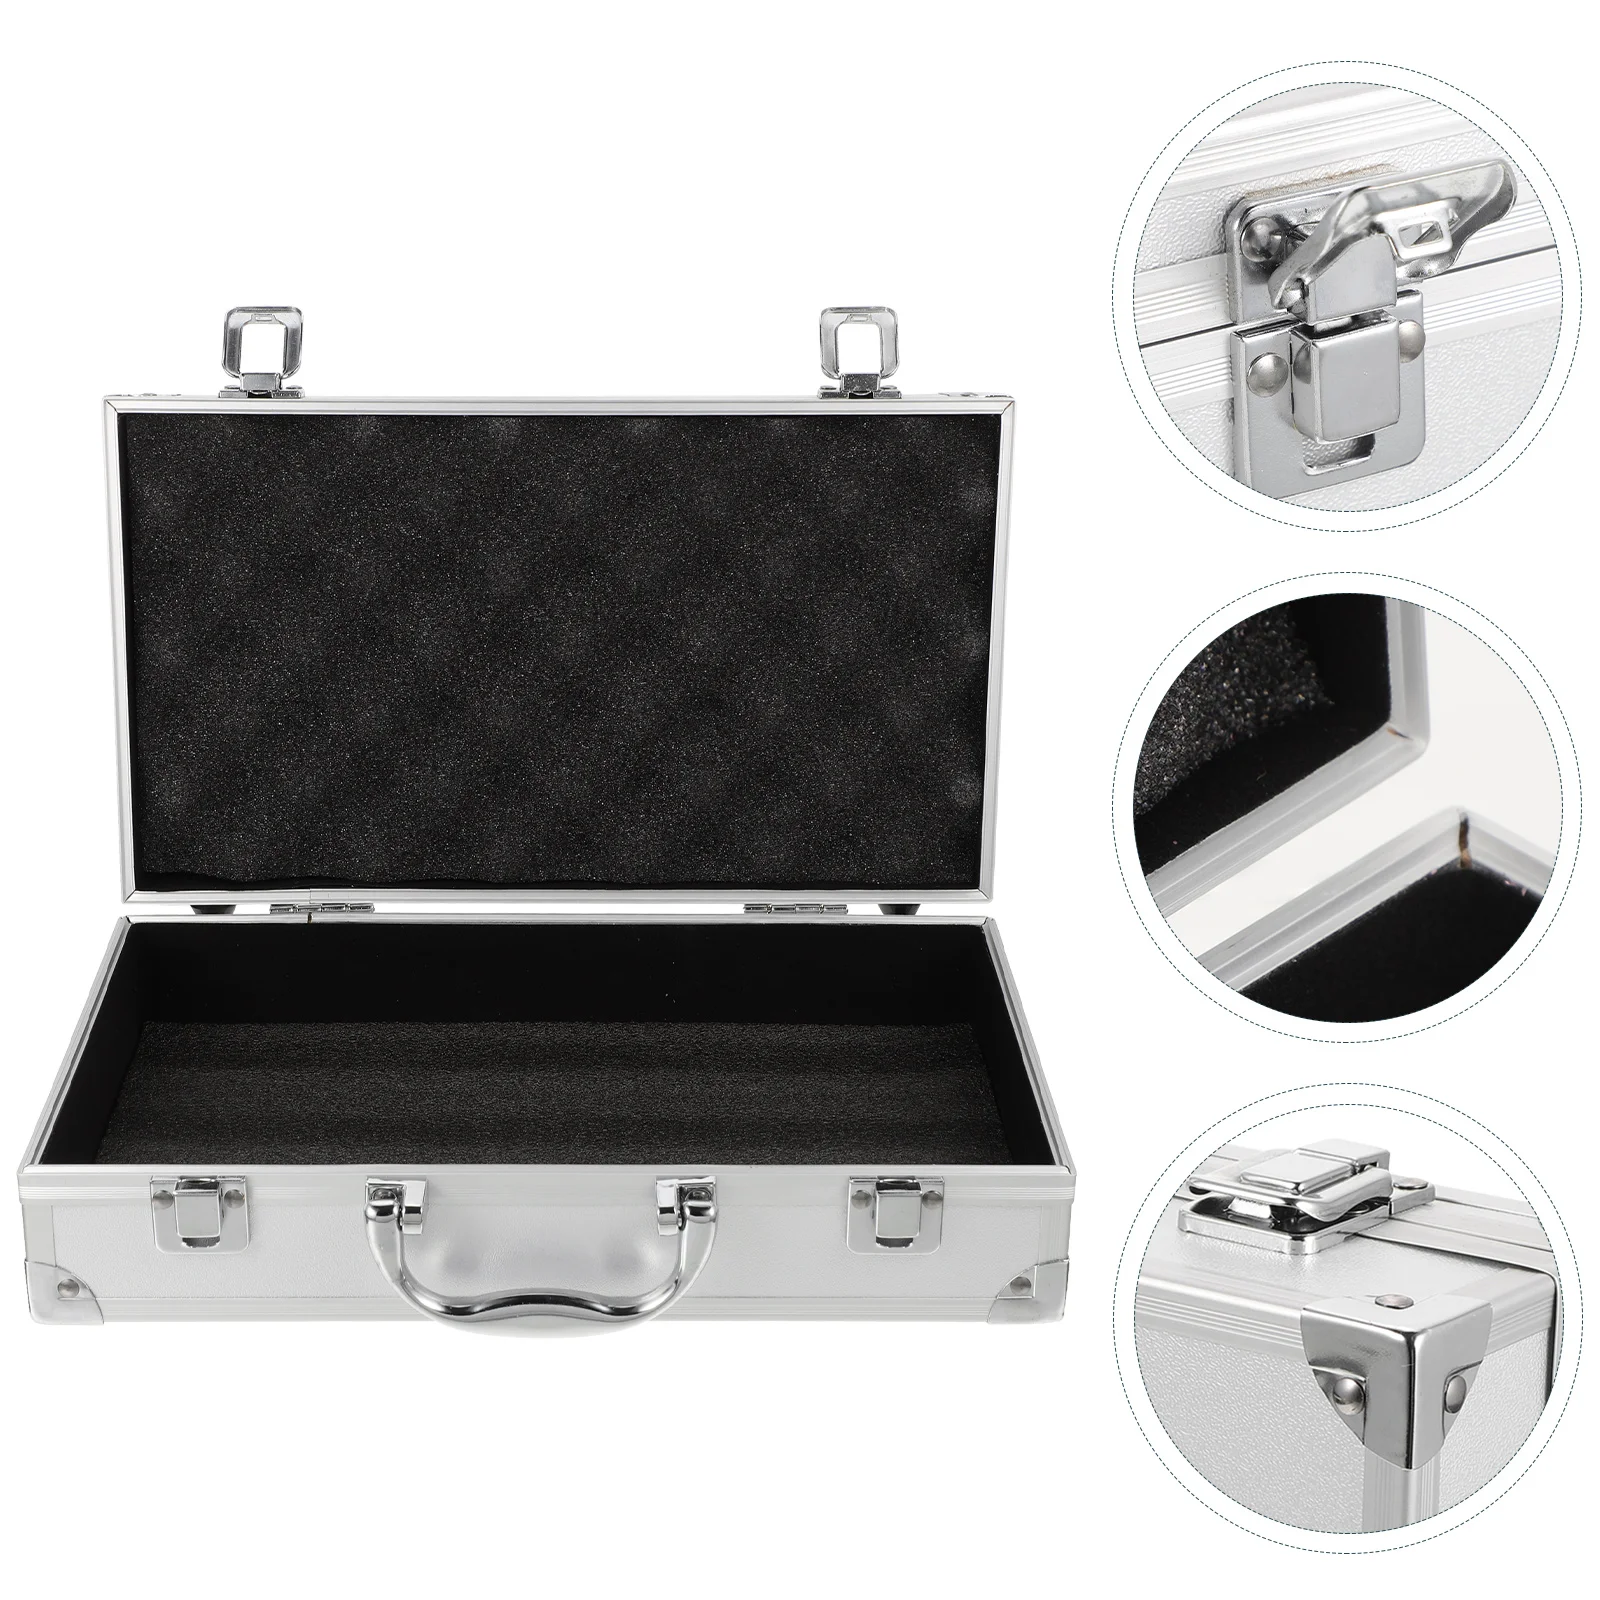 

Toolbox Makeup Travel Containers Tools Medicine Carrying Case Hard Cases Aluminum Alloy Suitcase